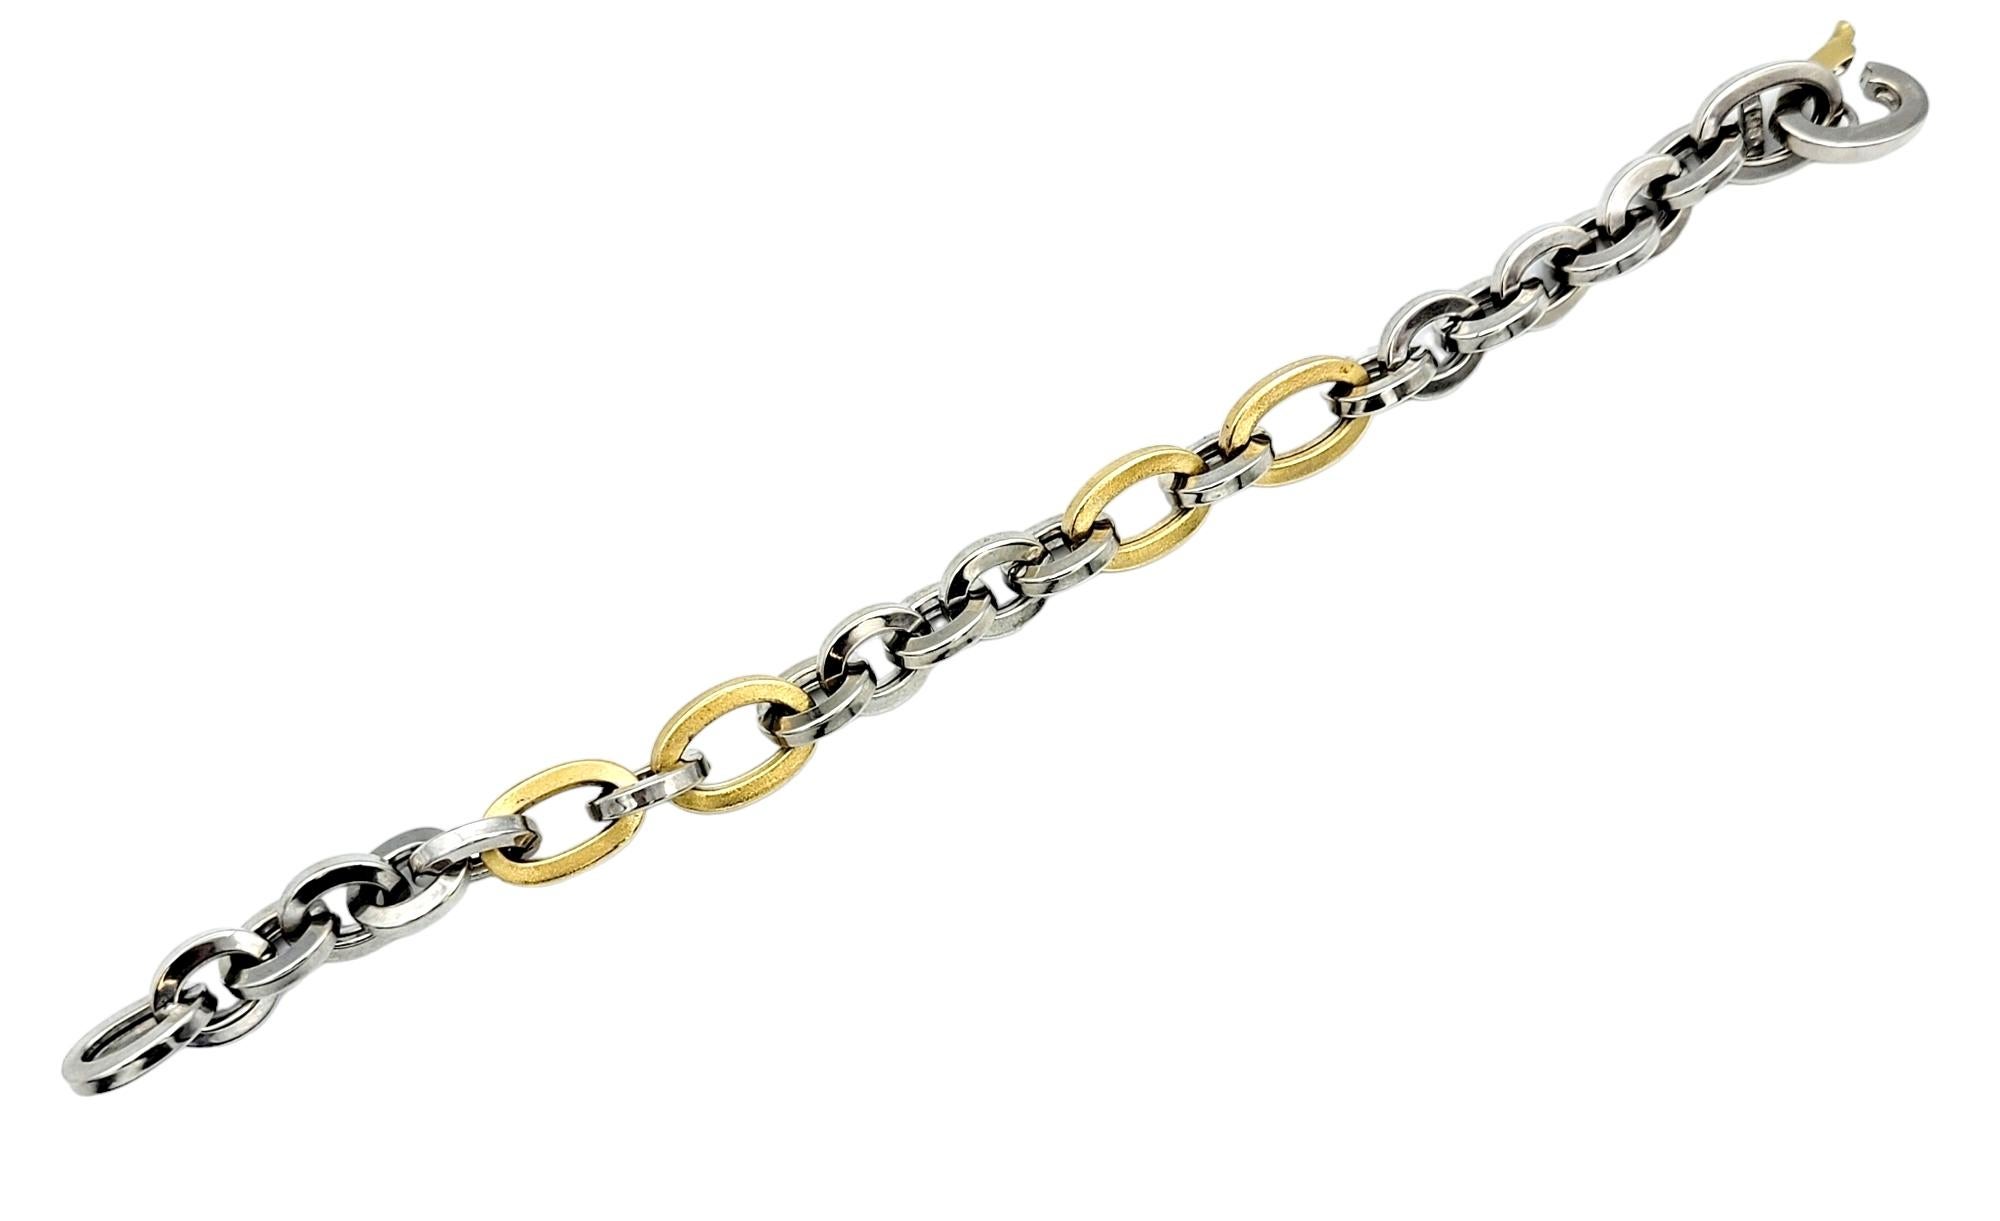 Unoaerre Large Chunky Two-Tone Chain Link Bracelet in 18 Karat Gold In Good Condition For Sale In Scottsdale, AZ